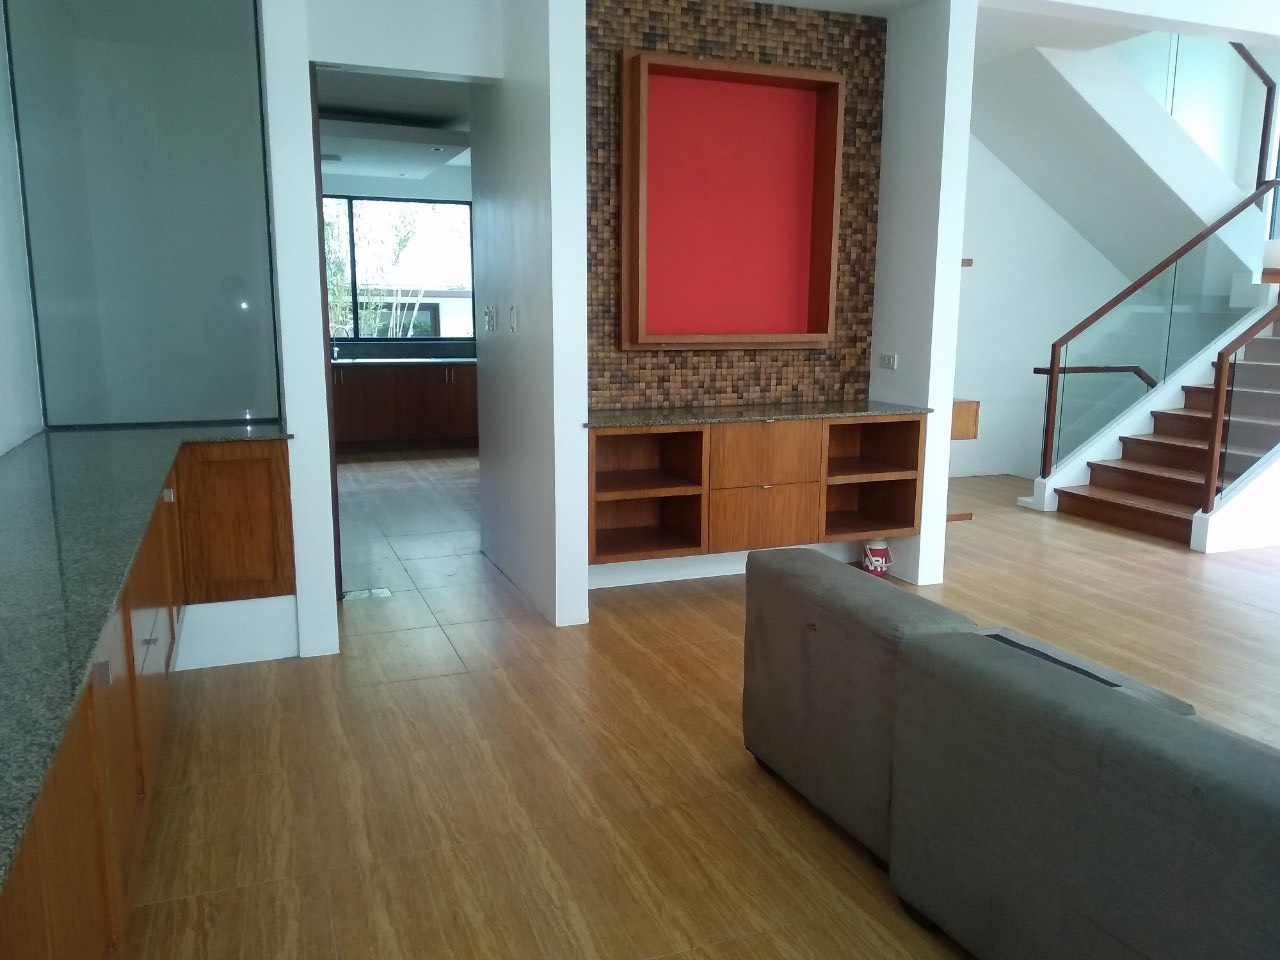 5 Bedrooms House For Rent, McKinley Hill Village 5